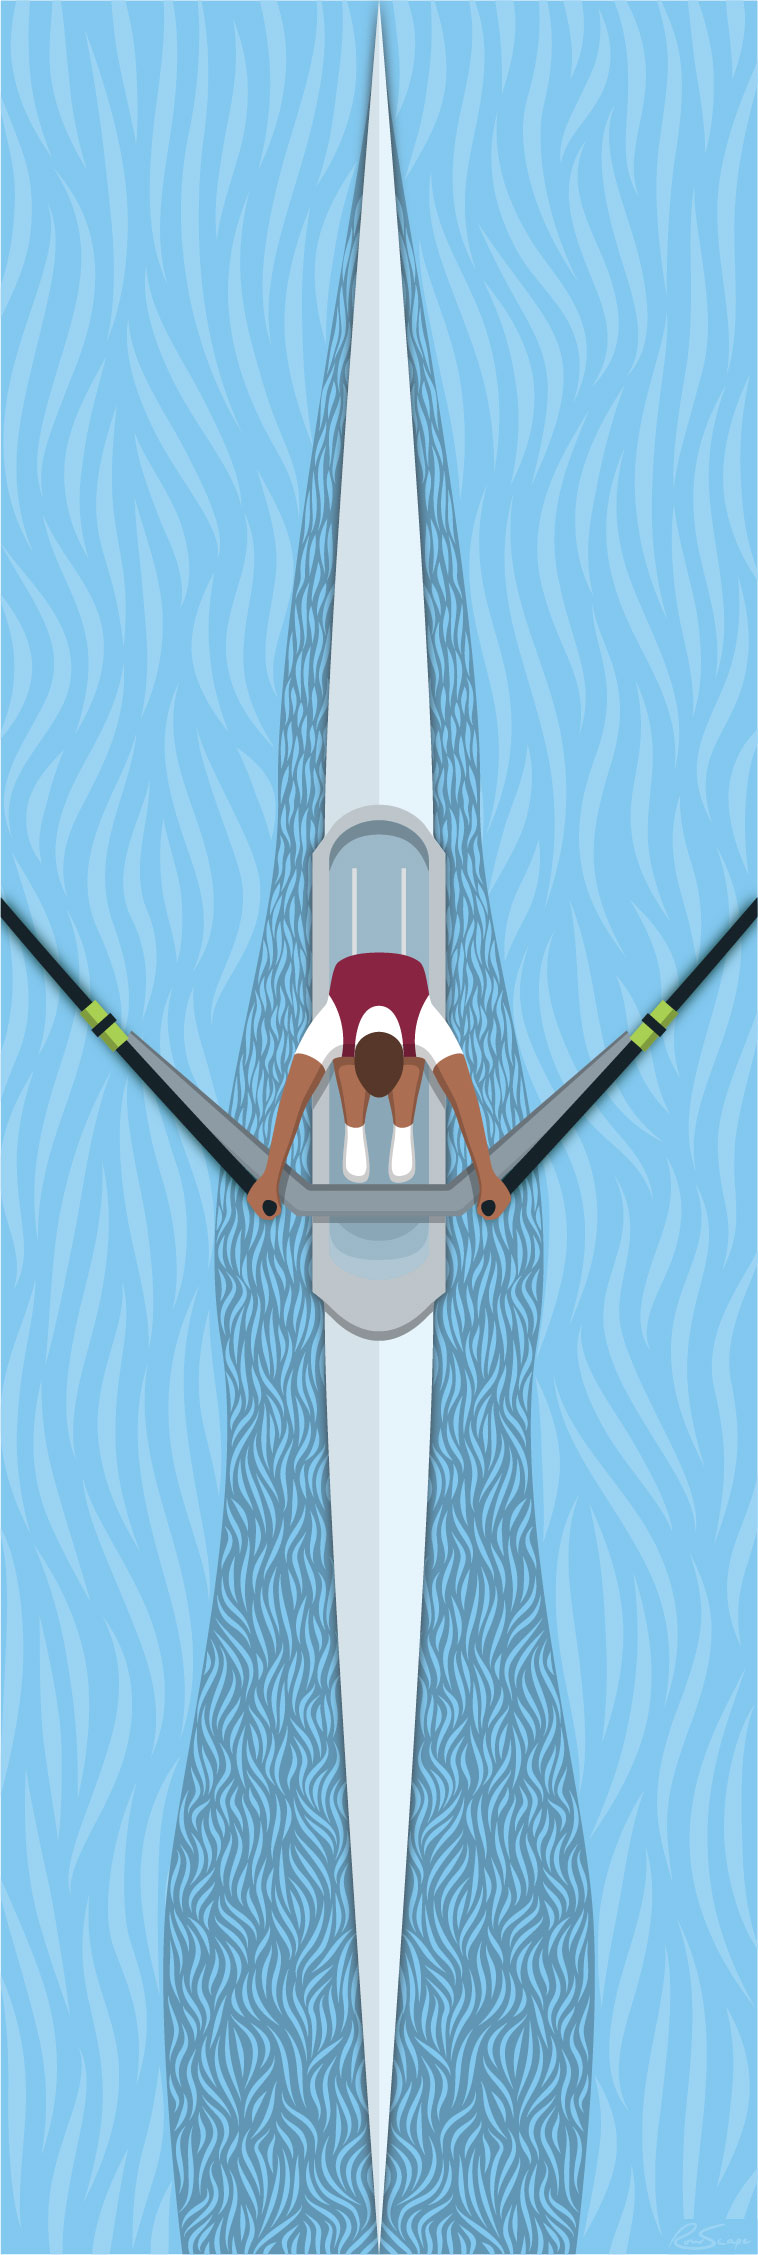 Male Sculler